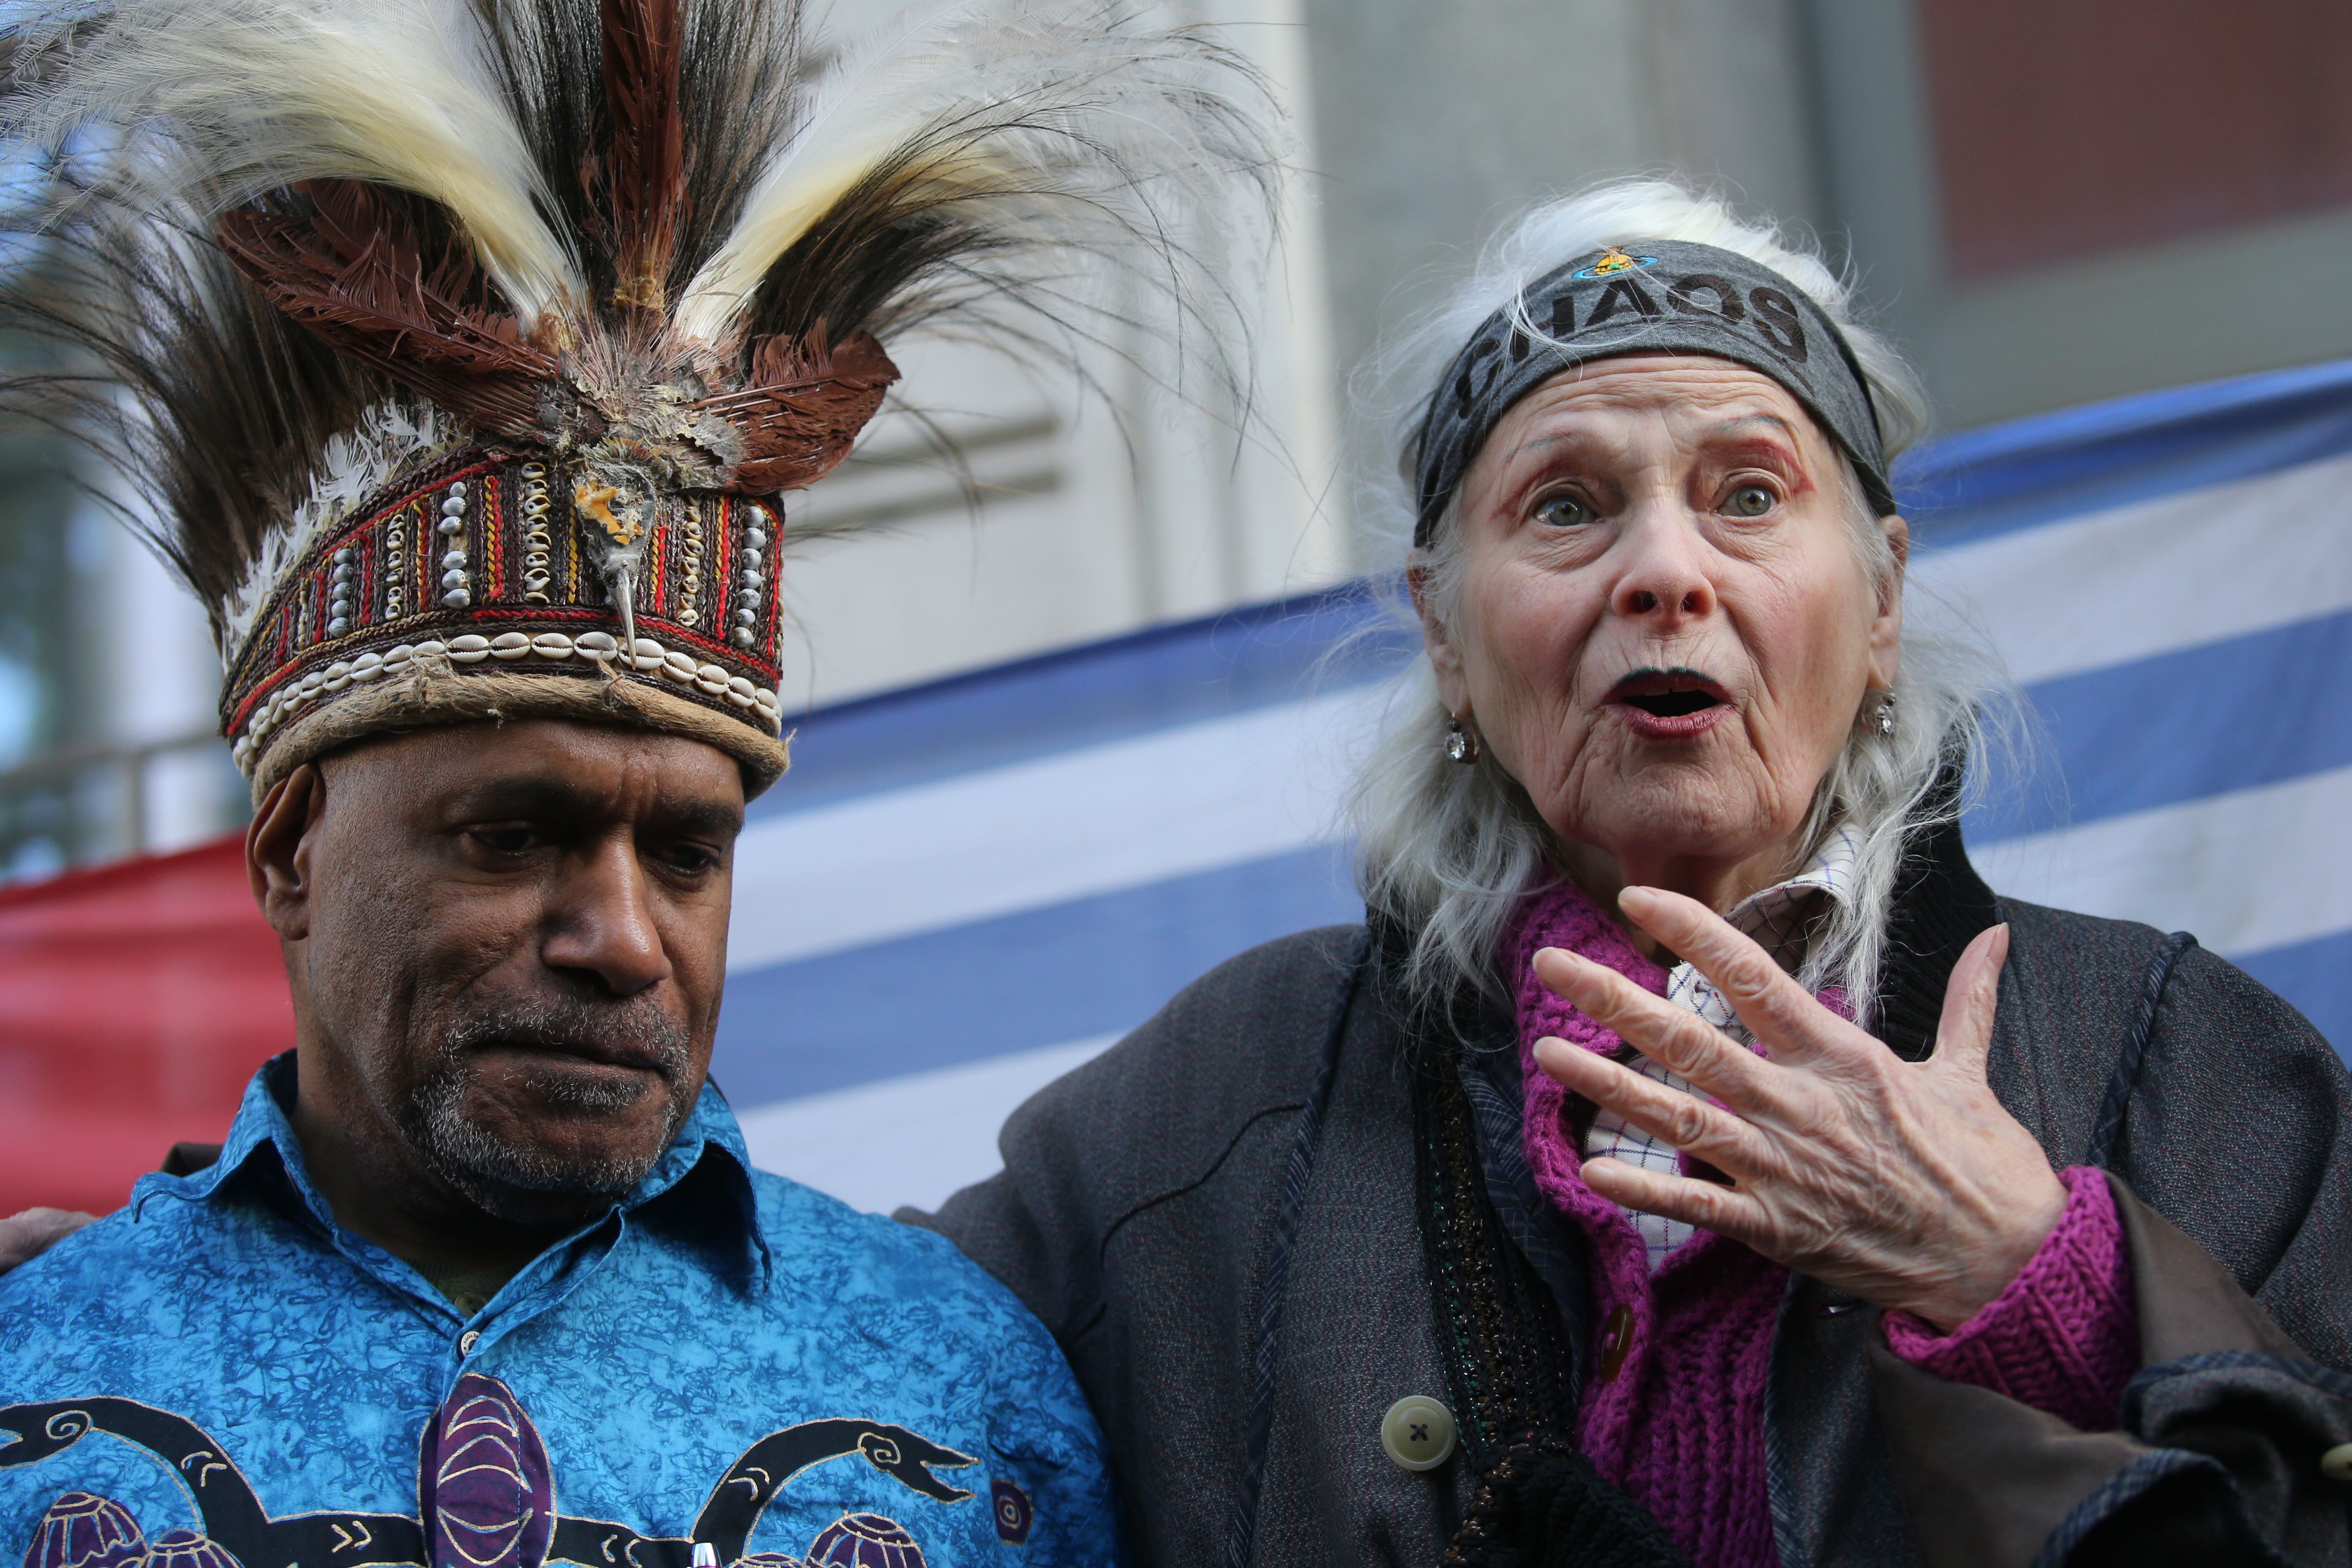 British designer Vivienne Westwood, (R), gestures with West Papua activist Benny Wenda (L) during a protest action to highlight the exploitation of the West Papua rainforest and the continued presence of BP in the area, outside the headquarters of BP in London, on October 18, 2019